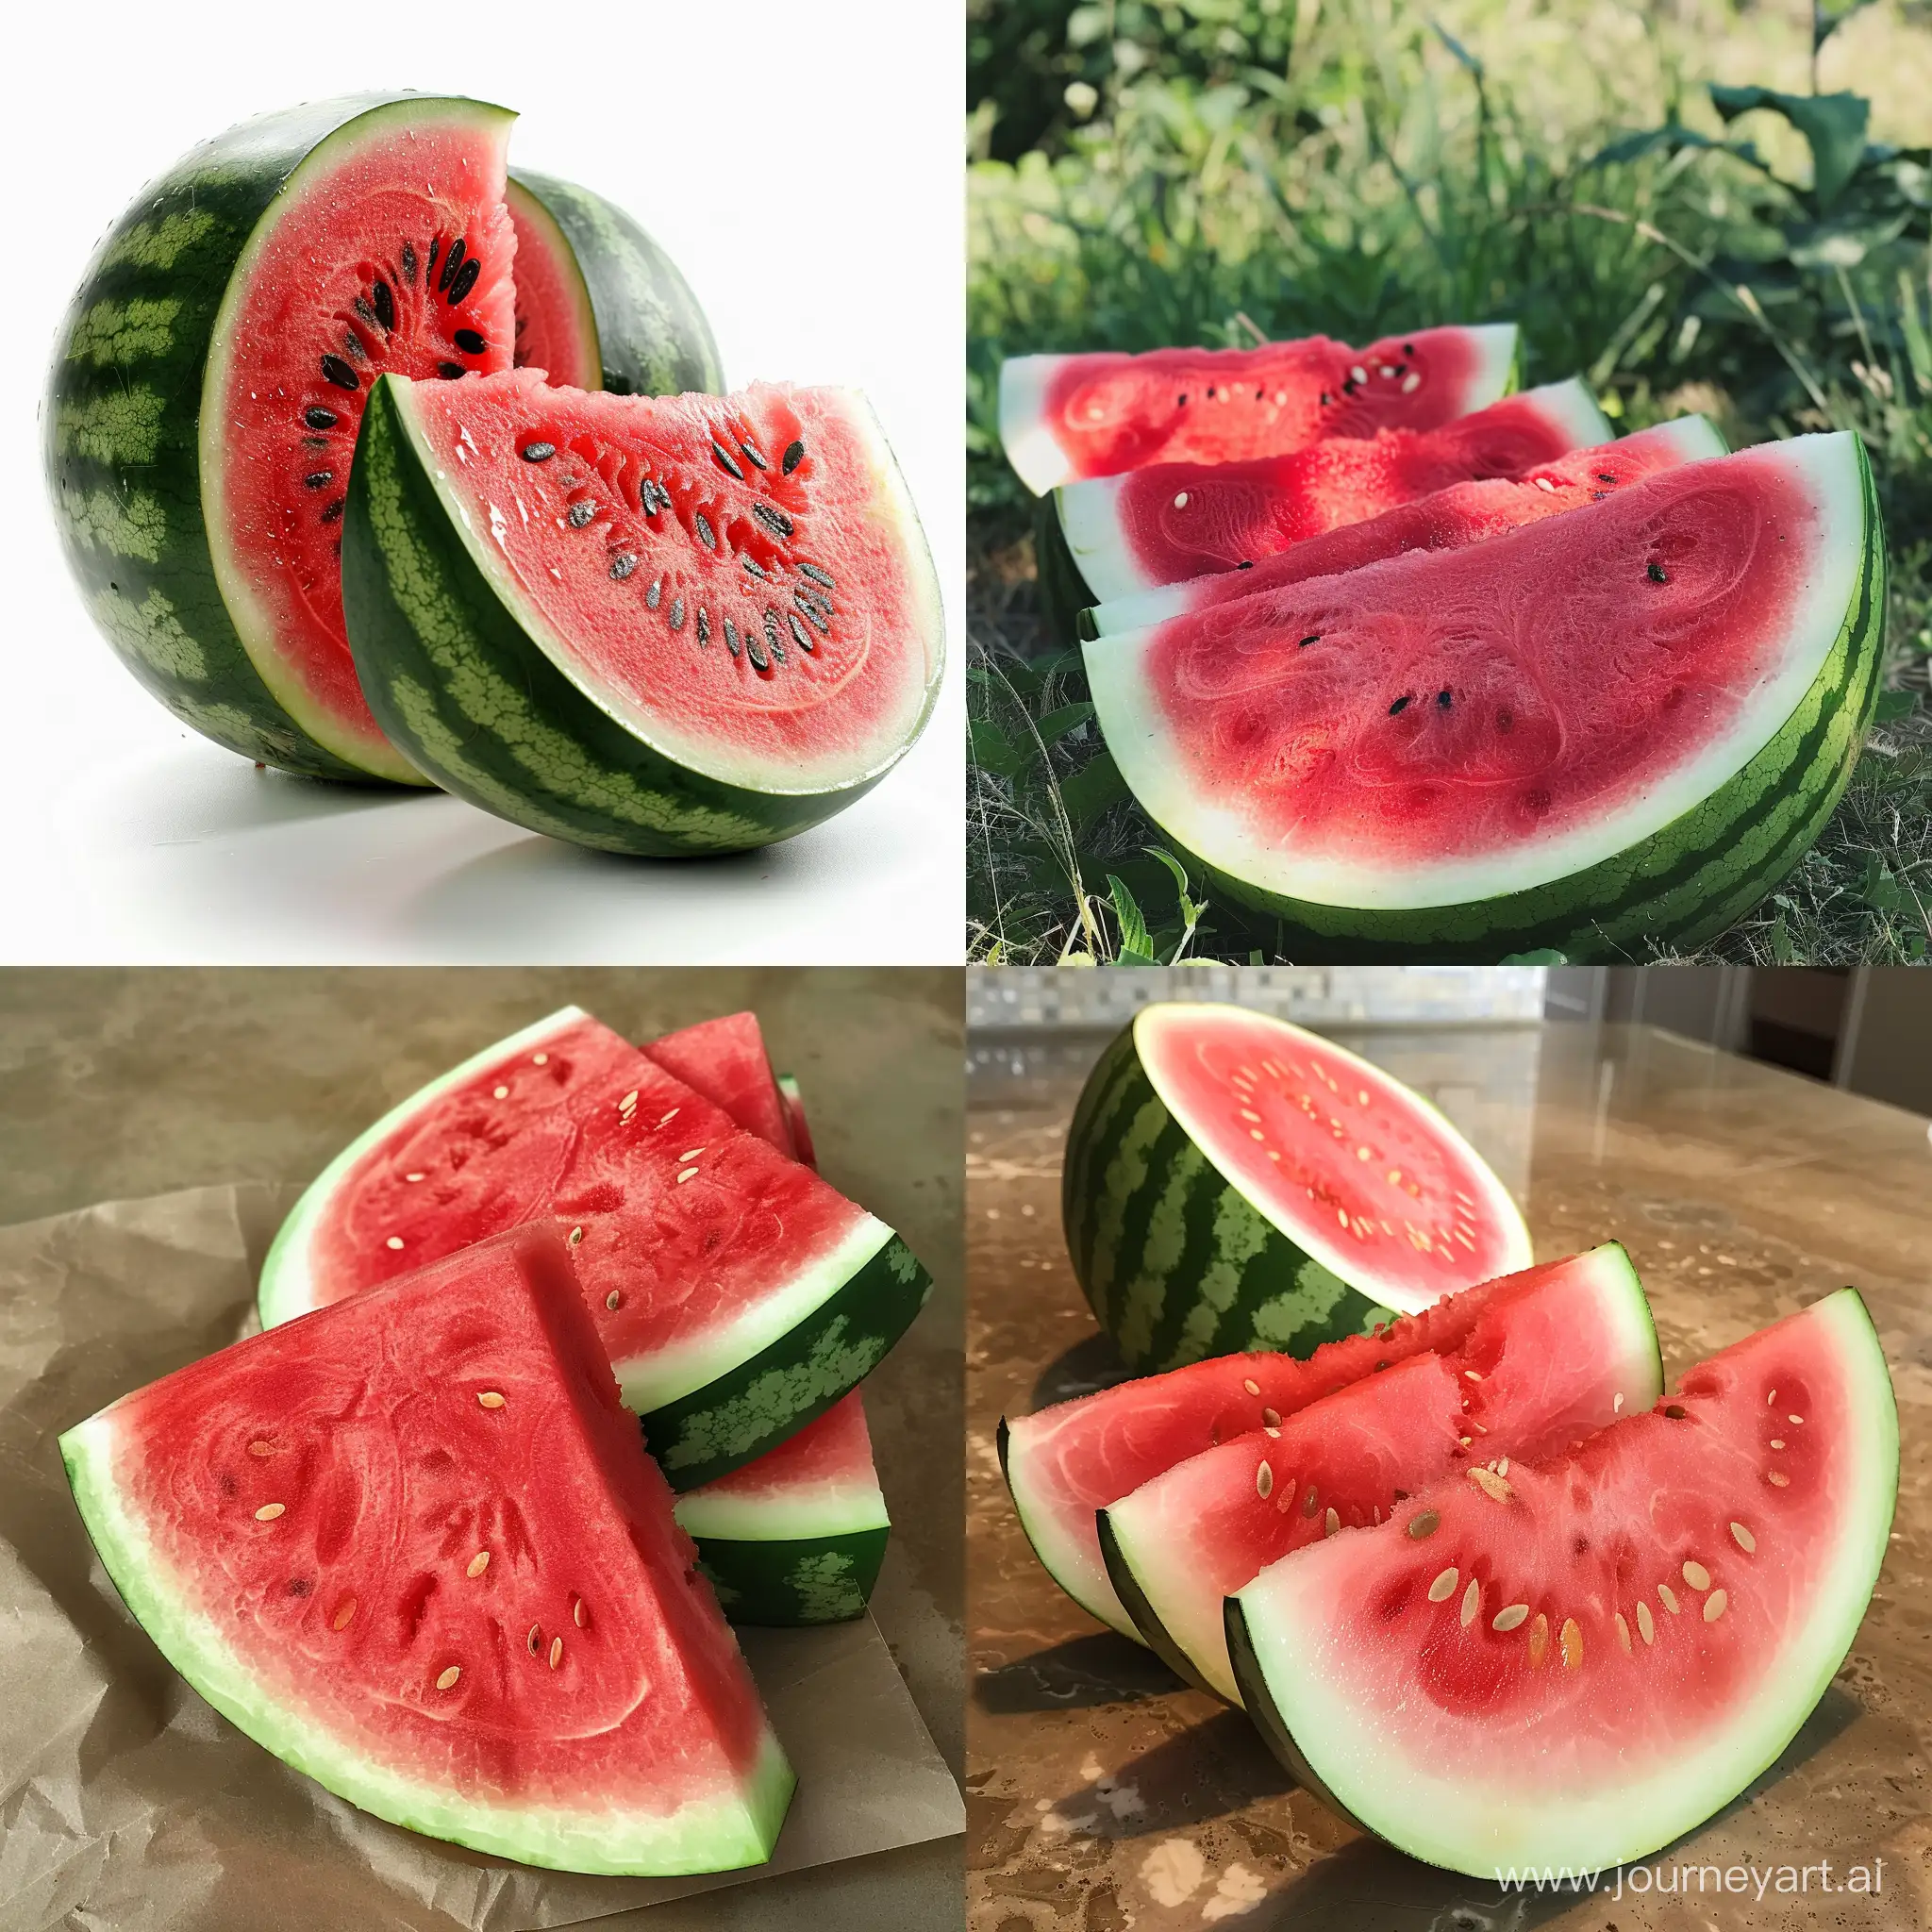 Real and natural photo of watermelon